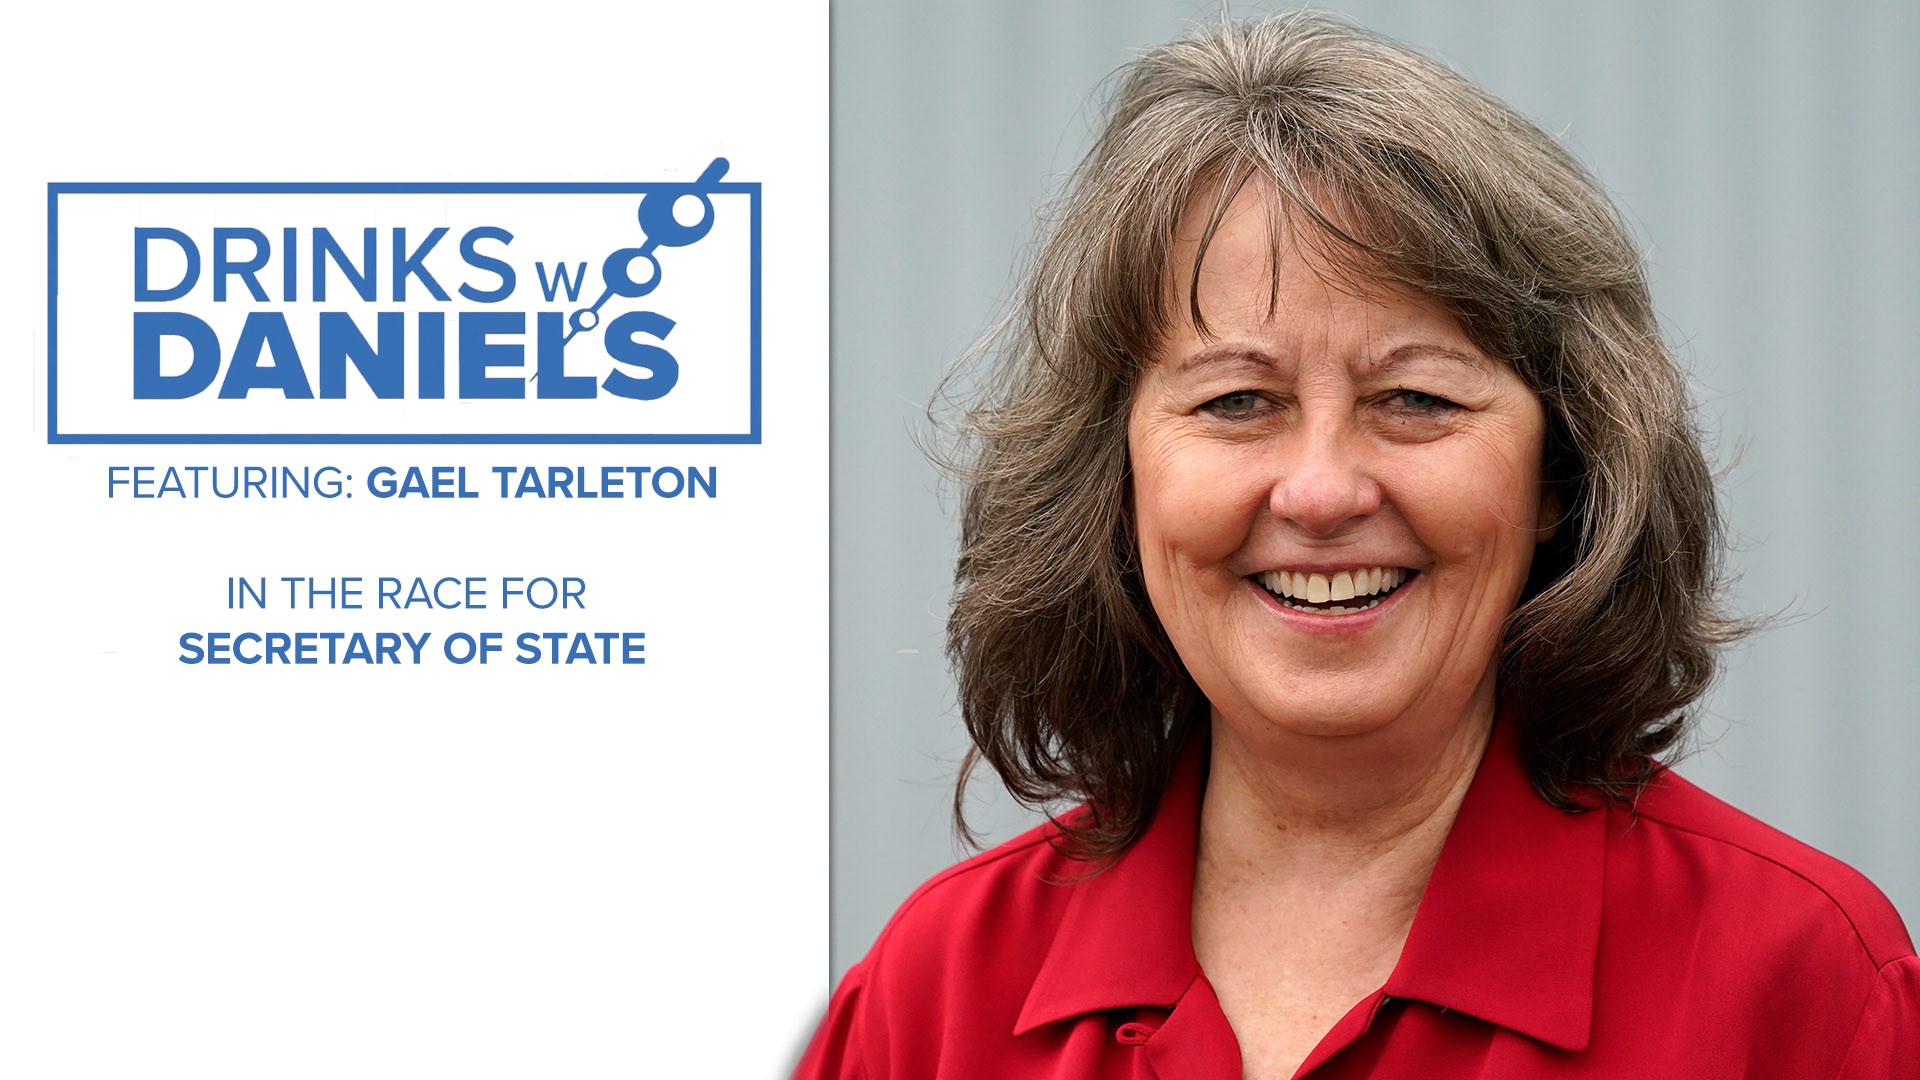 A former port commissioner and state representative, Gael Tarleton believes she’s positioned to end a decades-long Republican hold of the Secretary of State office.